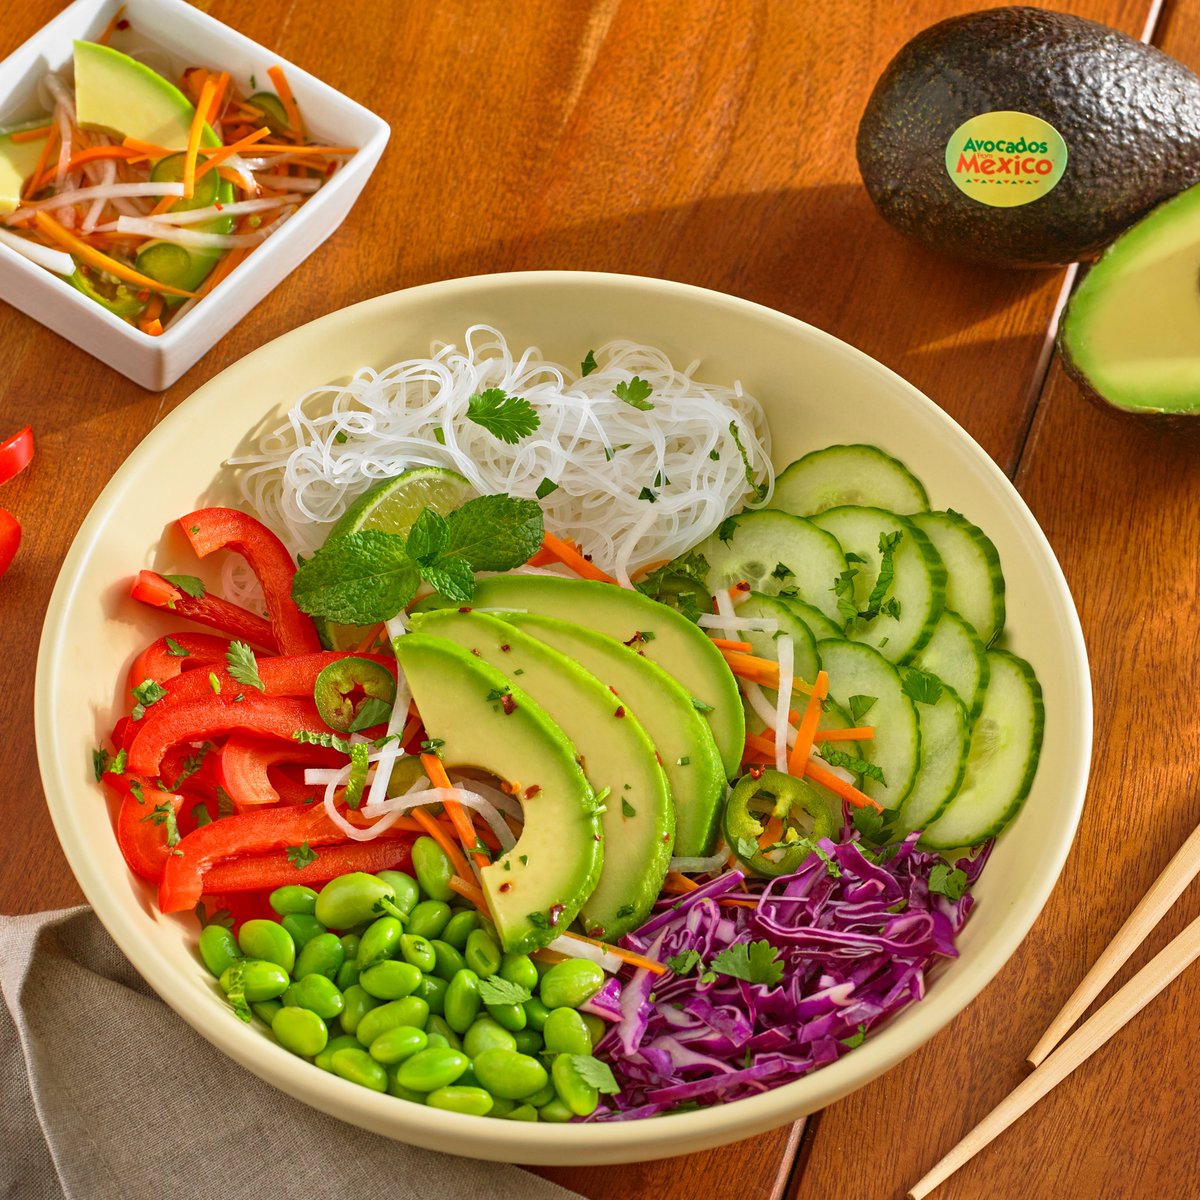 Spring into fresh new recipes with this Vietnamese Salad with Pickled Avocados! Bonus points because this recipe's certified by the American Heart Association – healthy AND delicious! 😋 Here's the link to this refreshing salad: bit.ly/3vphL4A #AlwaysGood…